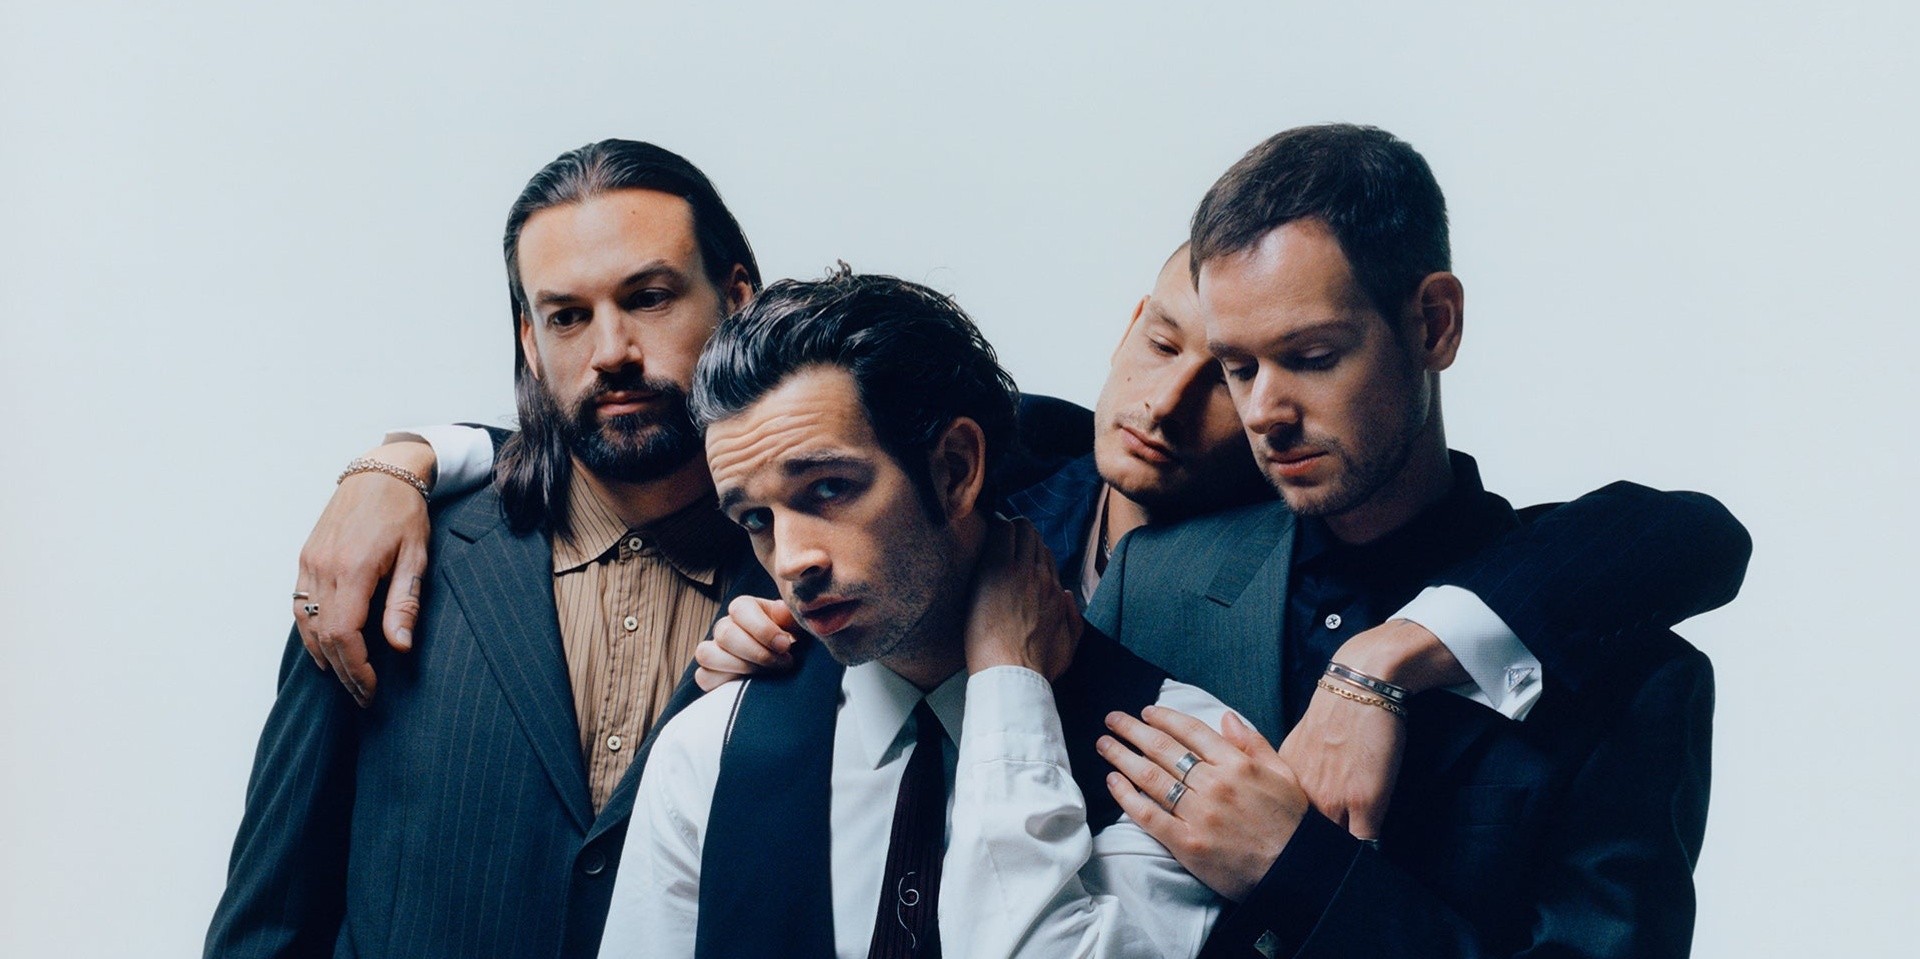 The 1975 sell out Singapore show in 30 minutes, add second concert date